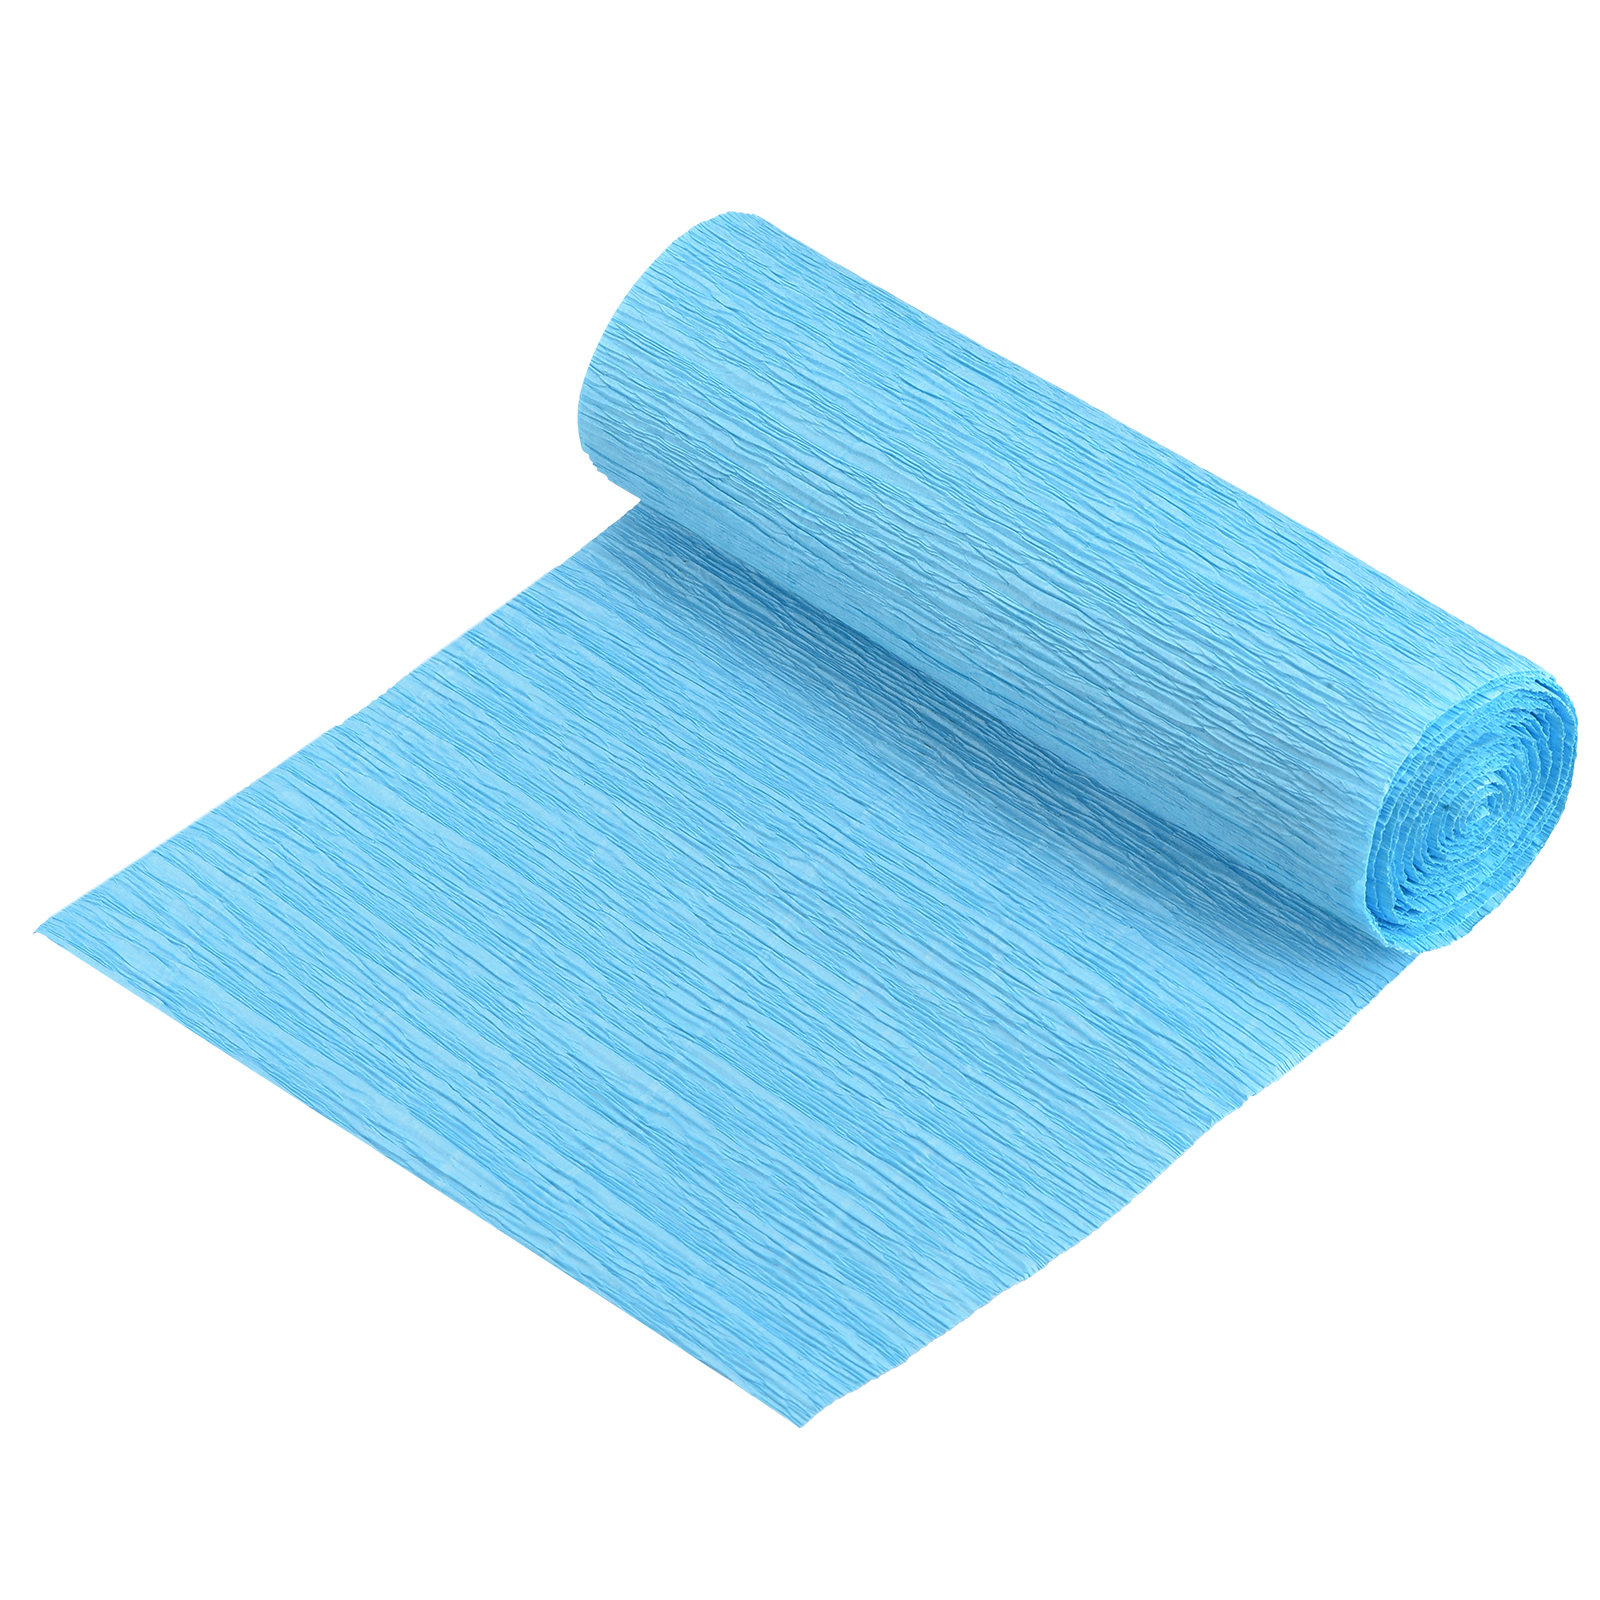 Uxcell Crepe Paper Roll Decoration 8.2ft Long 5.9 Inch Wide, Blue 3 Pack 